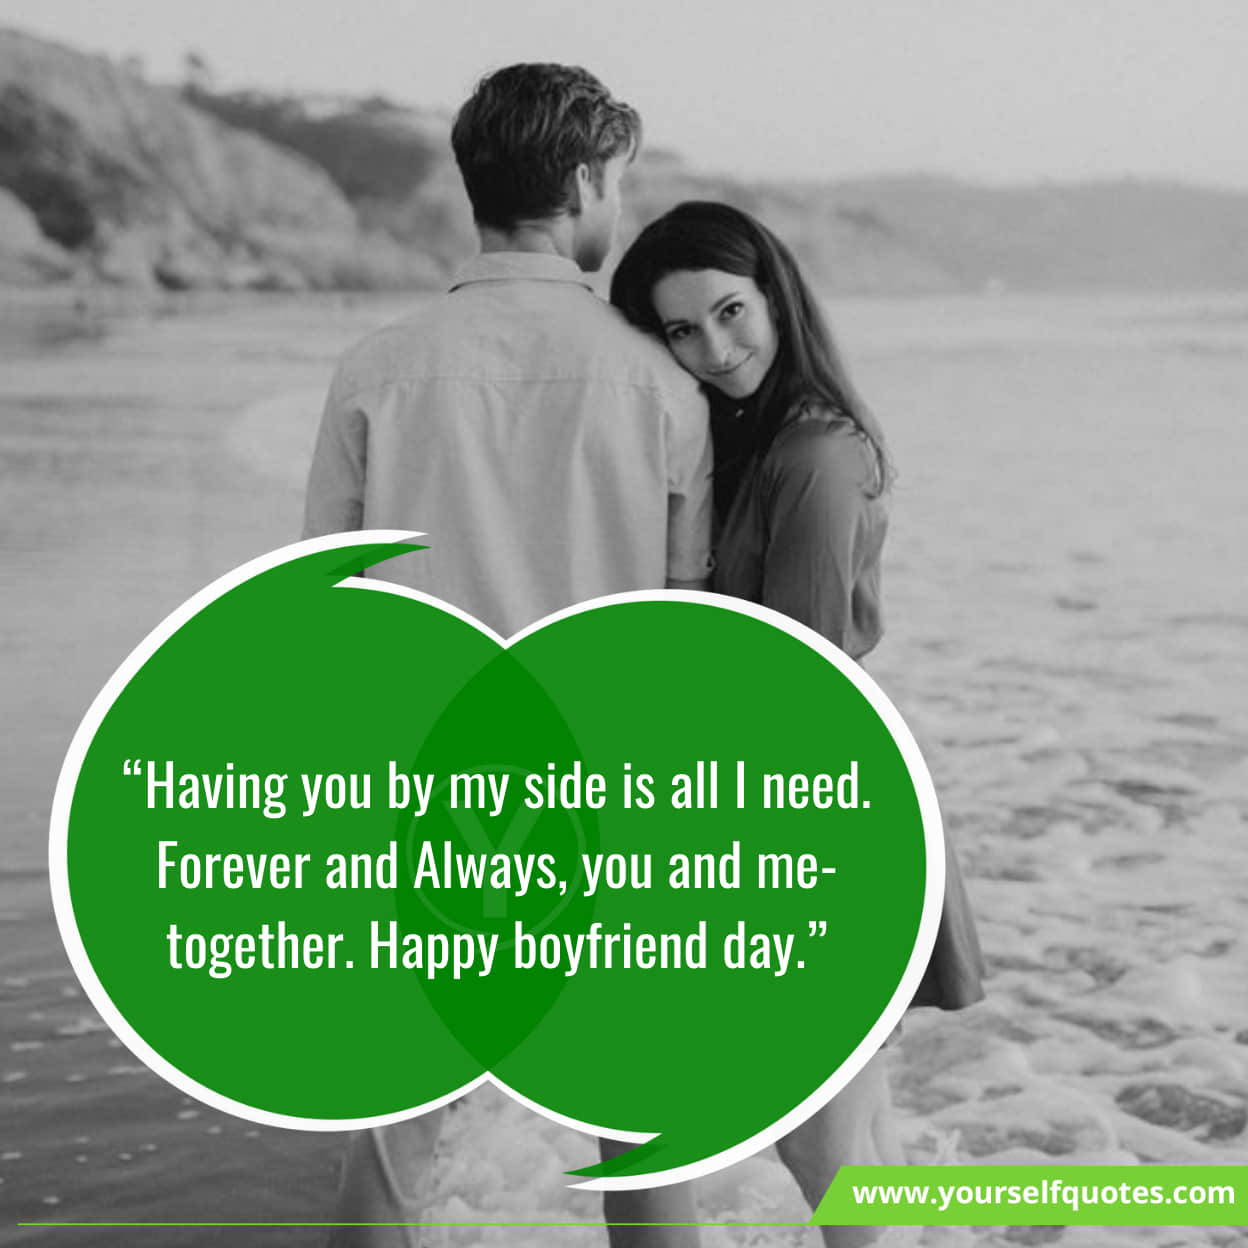 National Boyfriend Day Quotes, Wishes, History, Significance